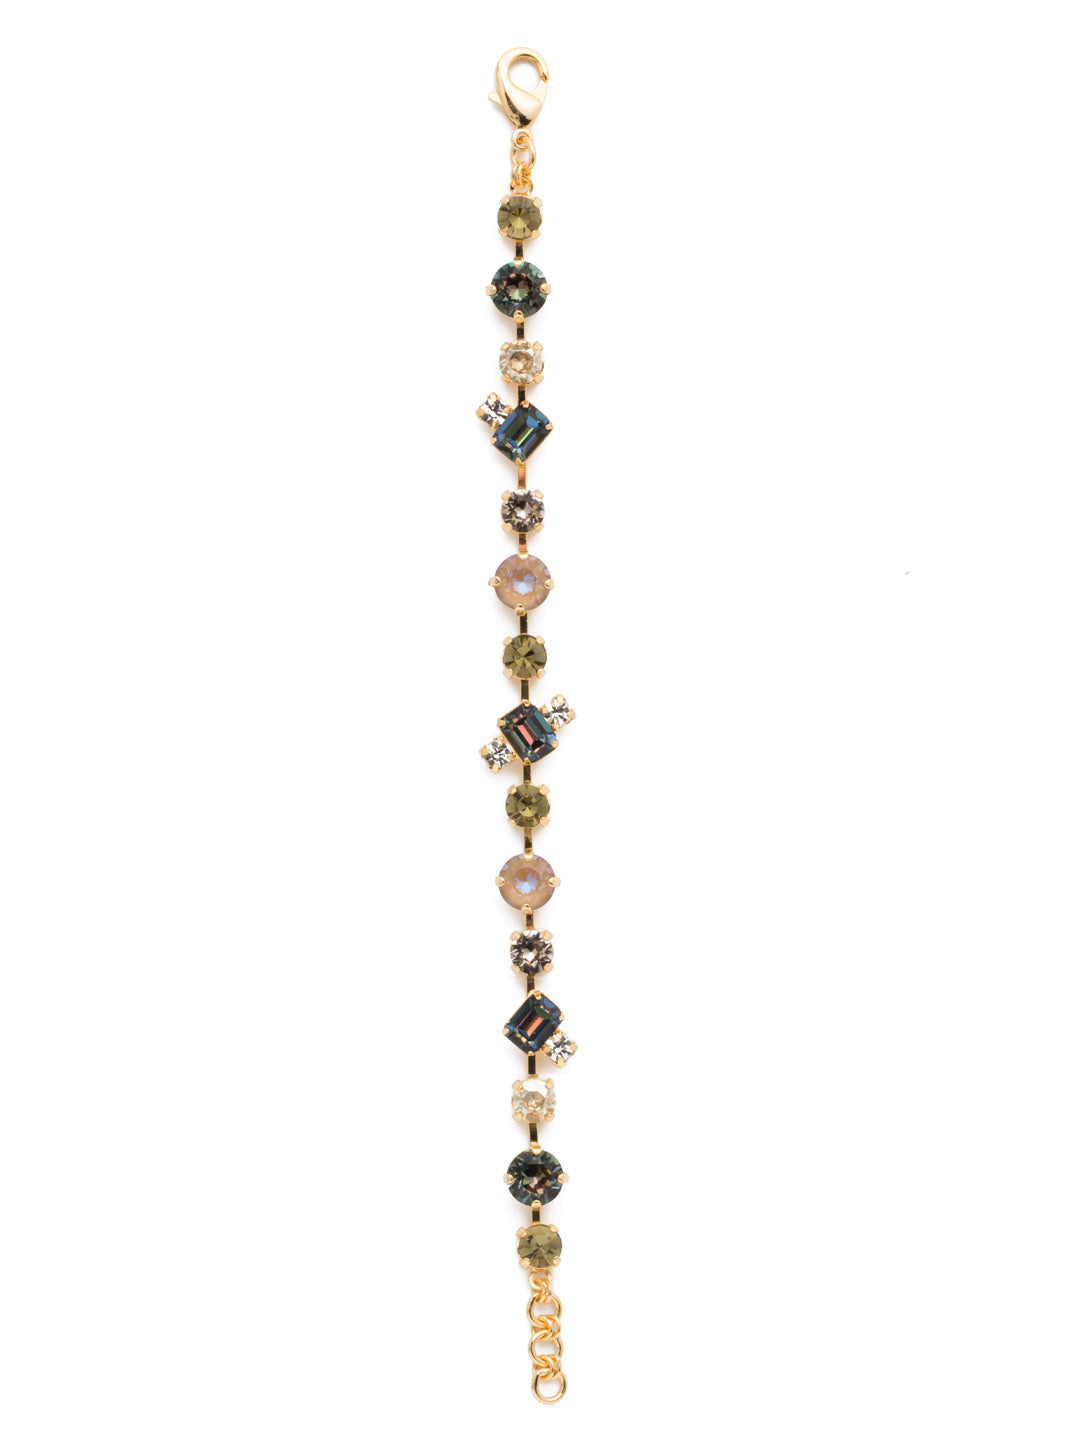 Melrose Tennis Bracelet - BET16BGCSM - The Melrose Tennis Bracelet has it all when it comes to sparkling crystals: varying opacities and shades of round and emerald stones make this a beautiful piece. From Sorrelli's Cashmere collection in our Bright Gold-tone finish.